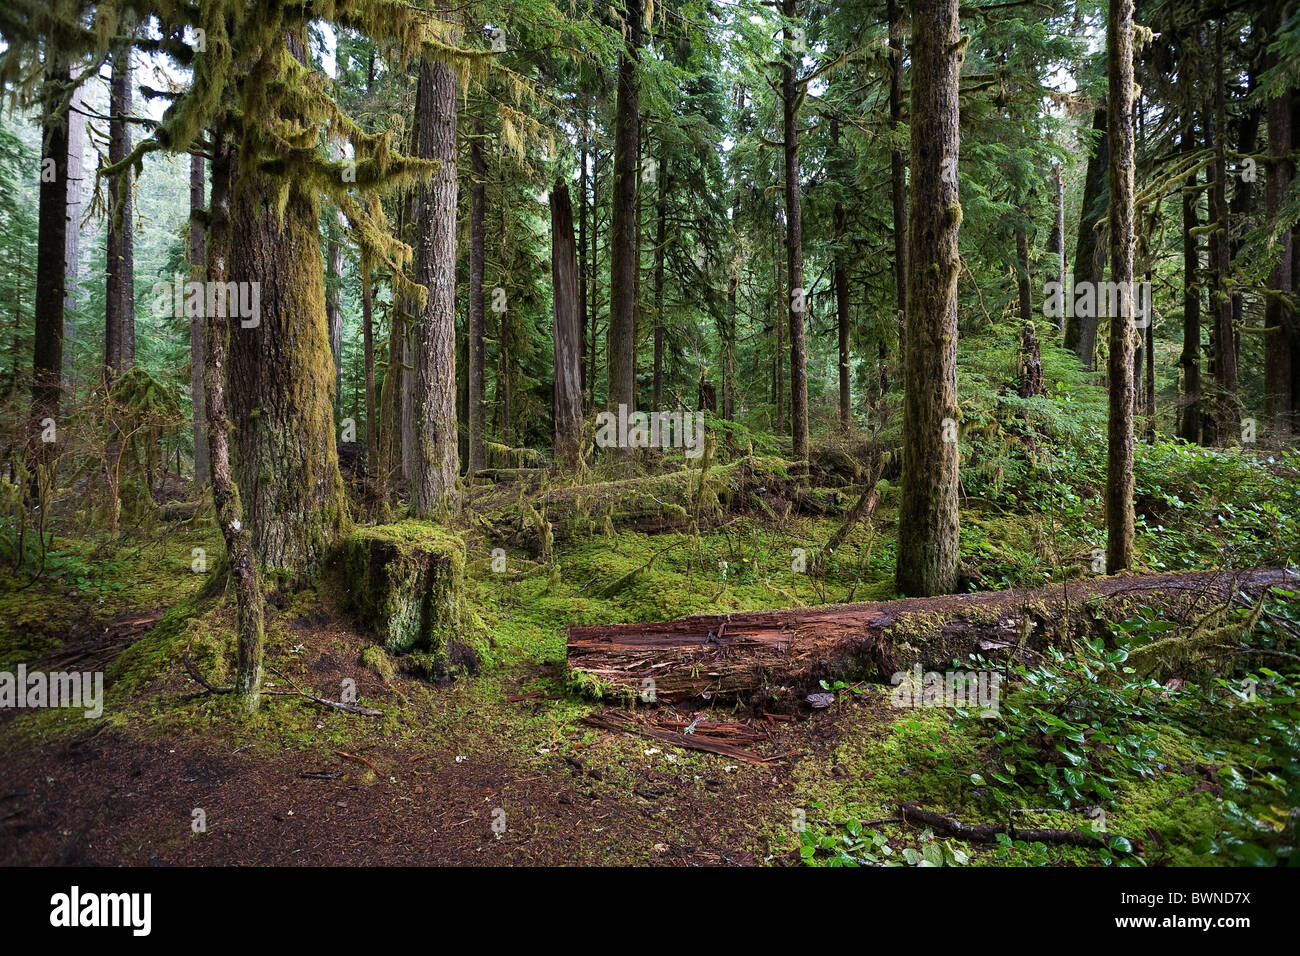 Old-growth forest in the Sol Duc Valley - Olympic National Park, Washington. Location near Sol Duc Salmon Cascades. Stock Photo